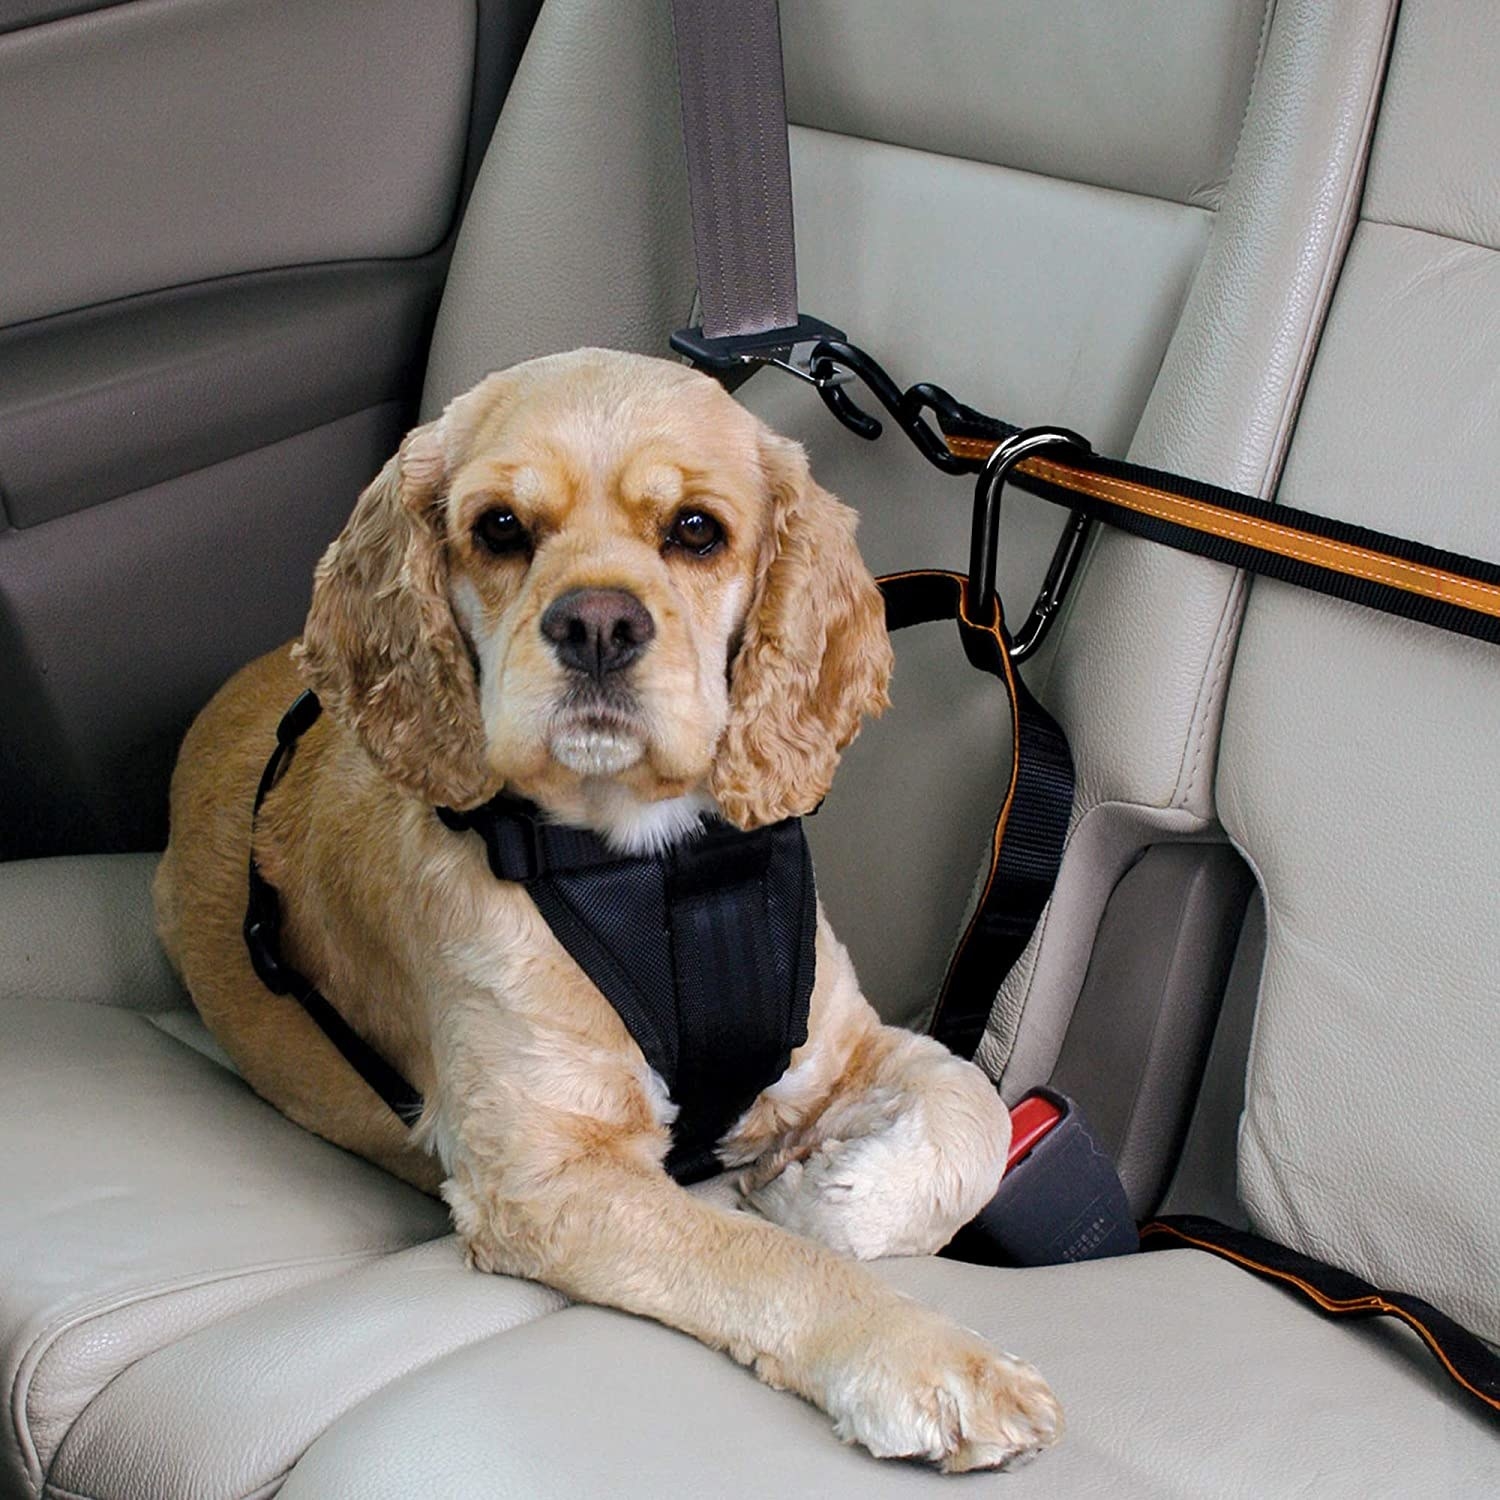 A yellow dog sits in the backseat of a car with a zipline leash attached to them